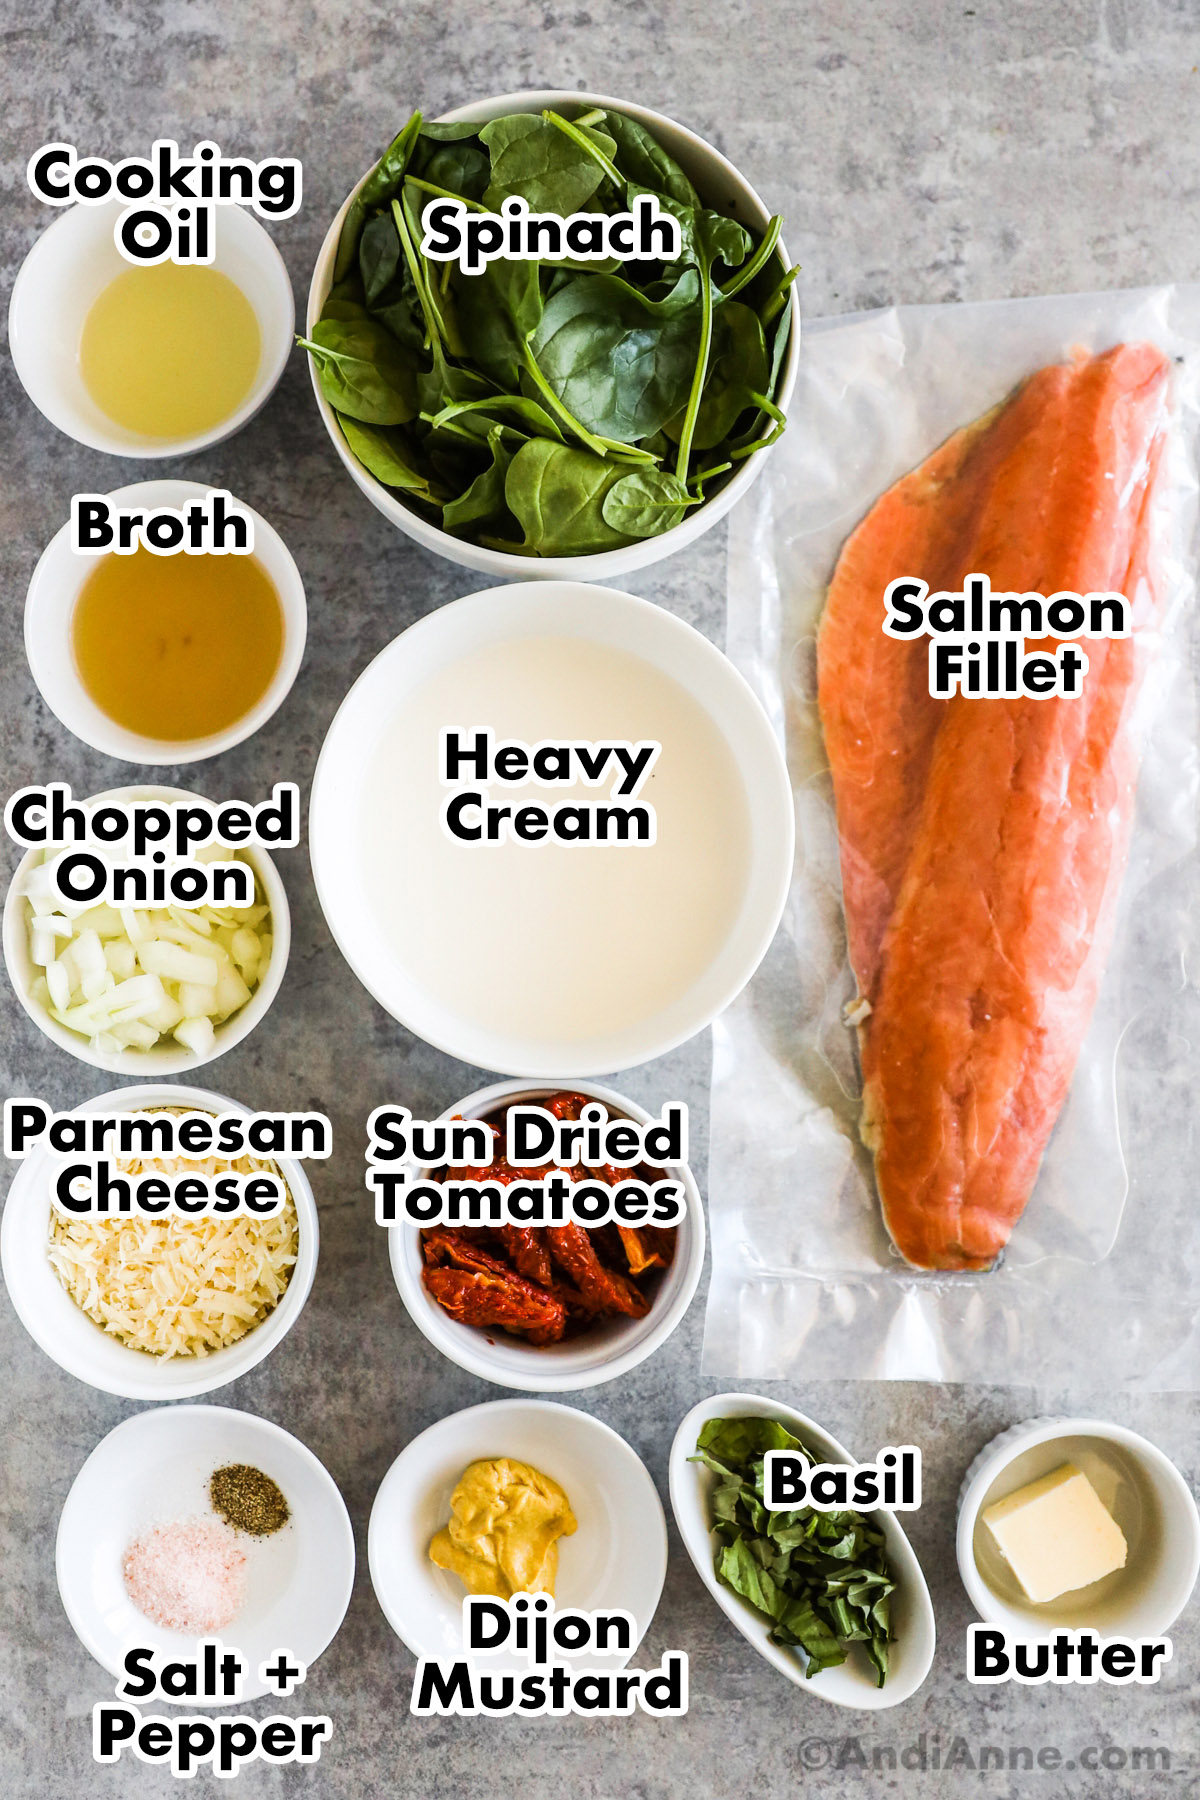 Recipe ingredients in bowls including cooking oil, spinach, broth, heavy cream, chopped onion, parmesan, sun dried tomatoes, dijon mustard, basil, butter, and a salmon fillet in plastic.